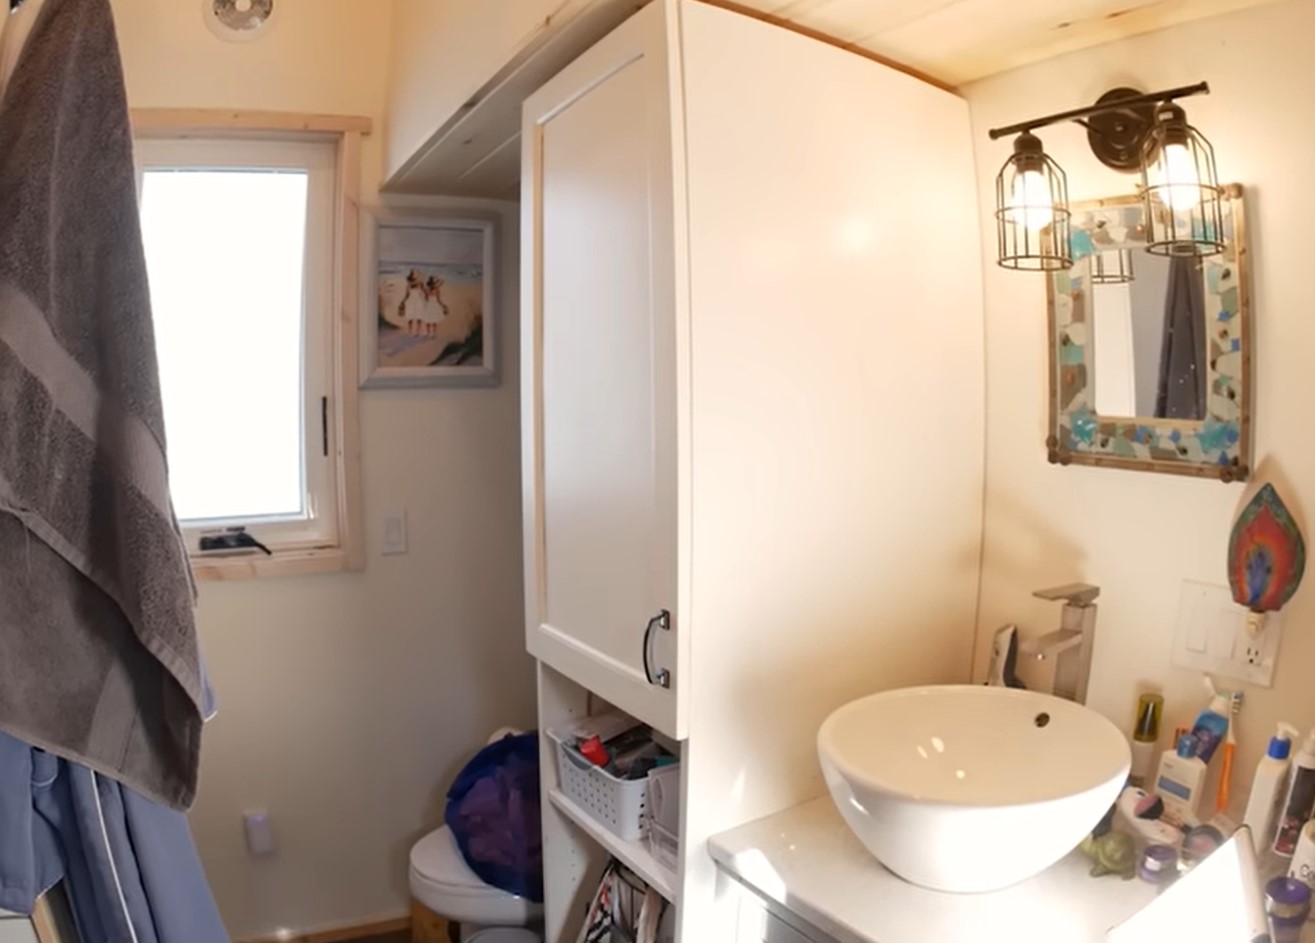 Their tiny house retirement home also features a full bathroom.